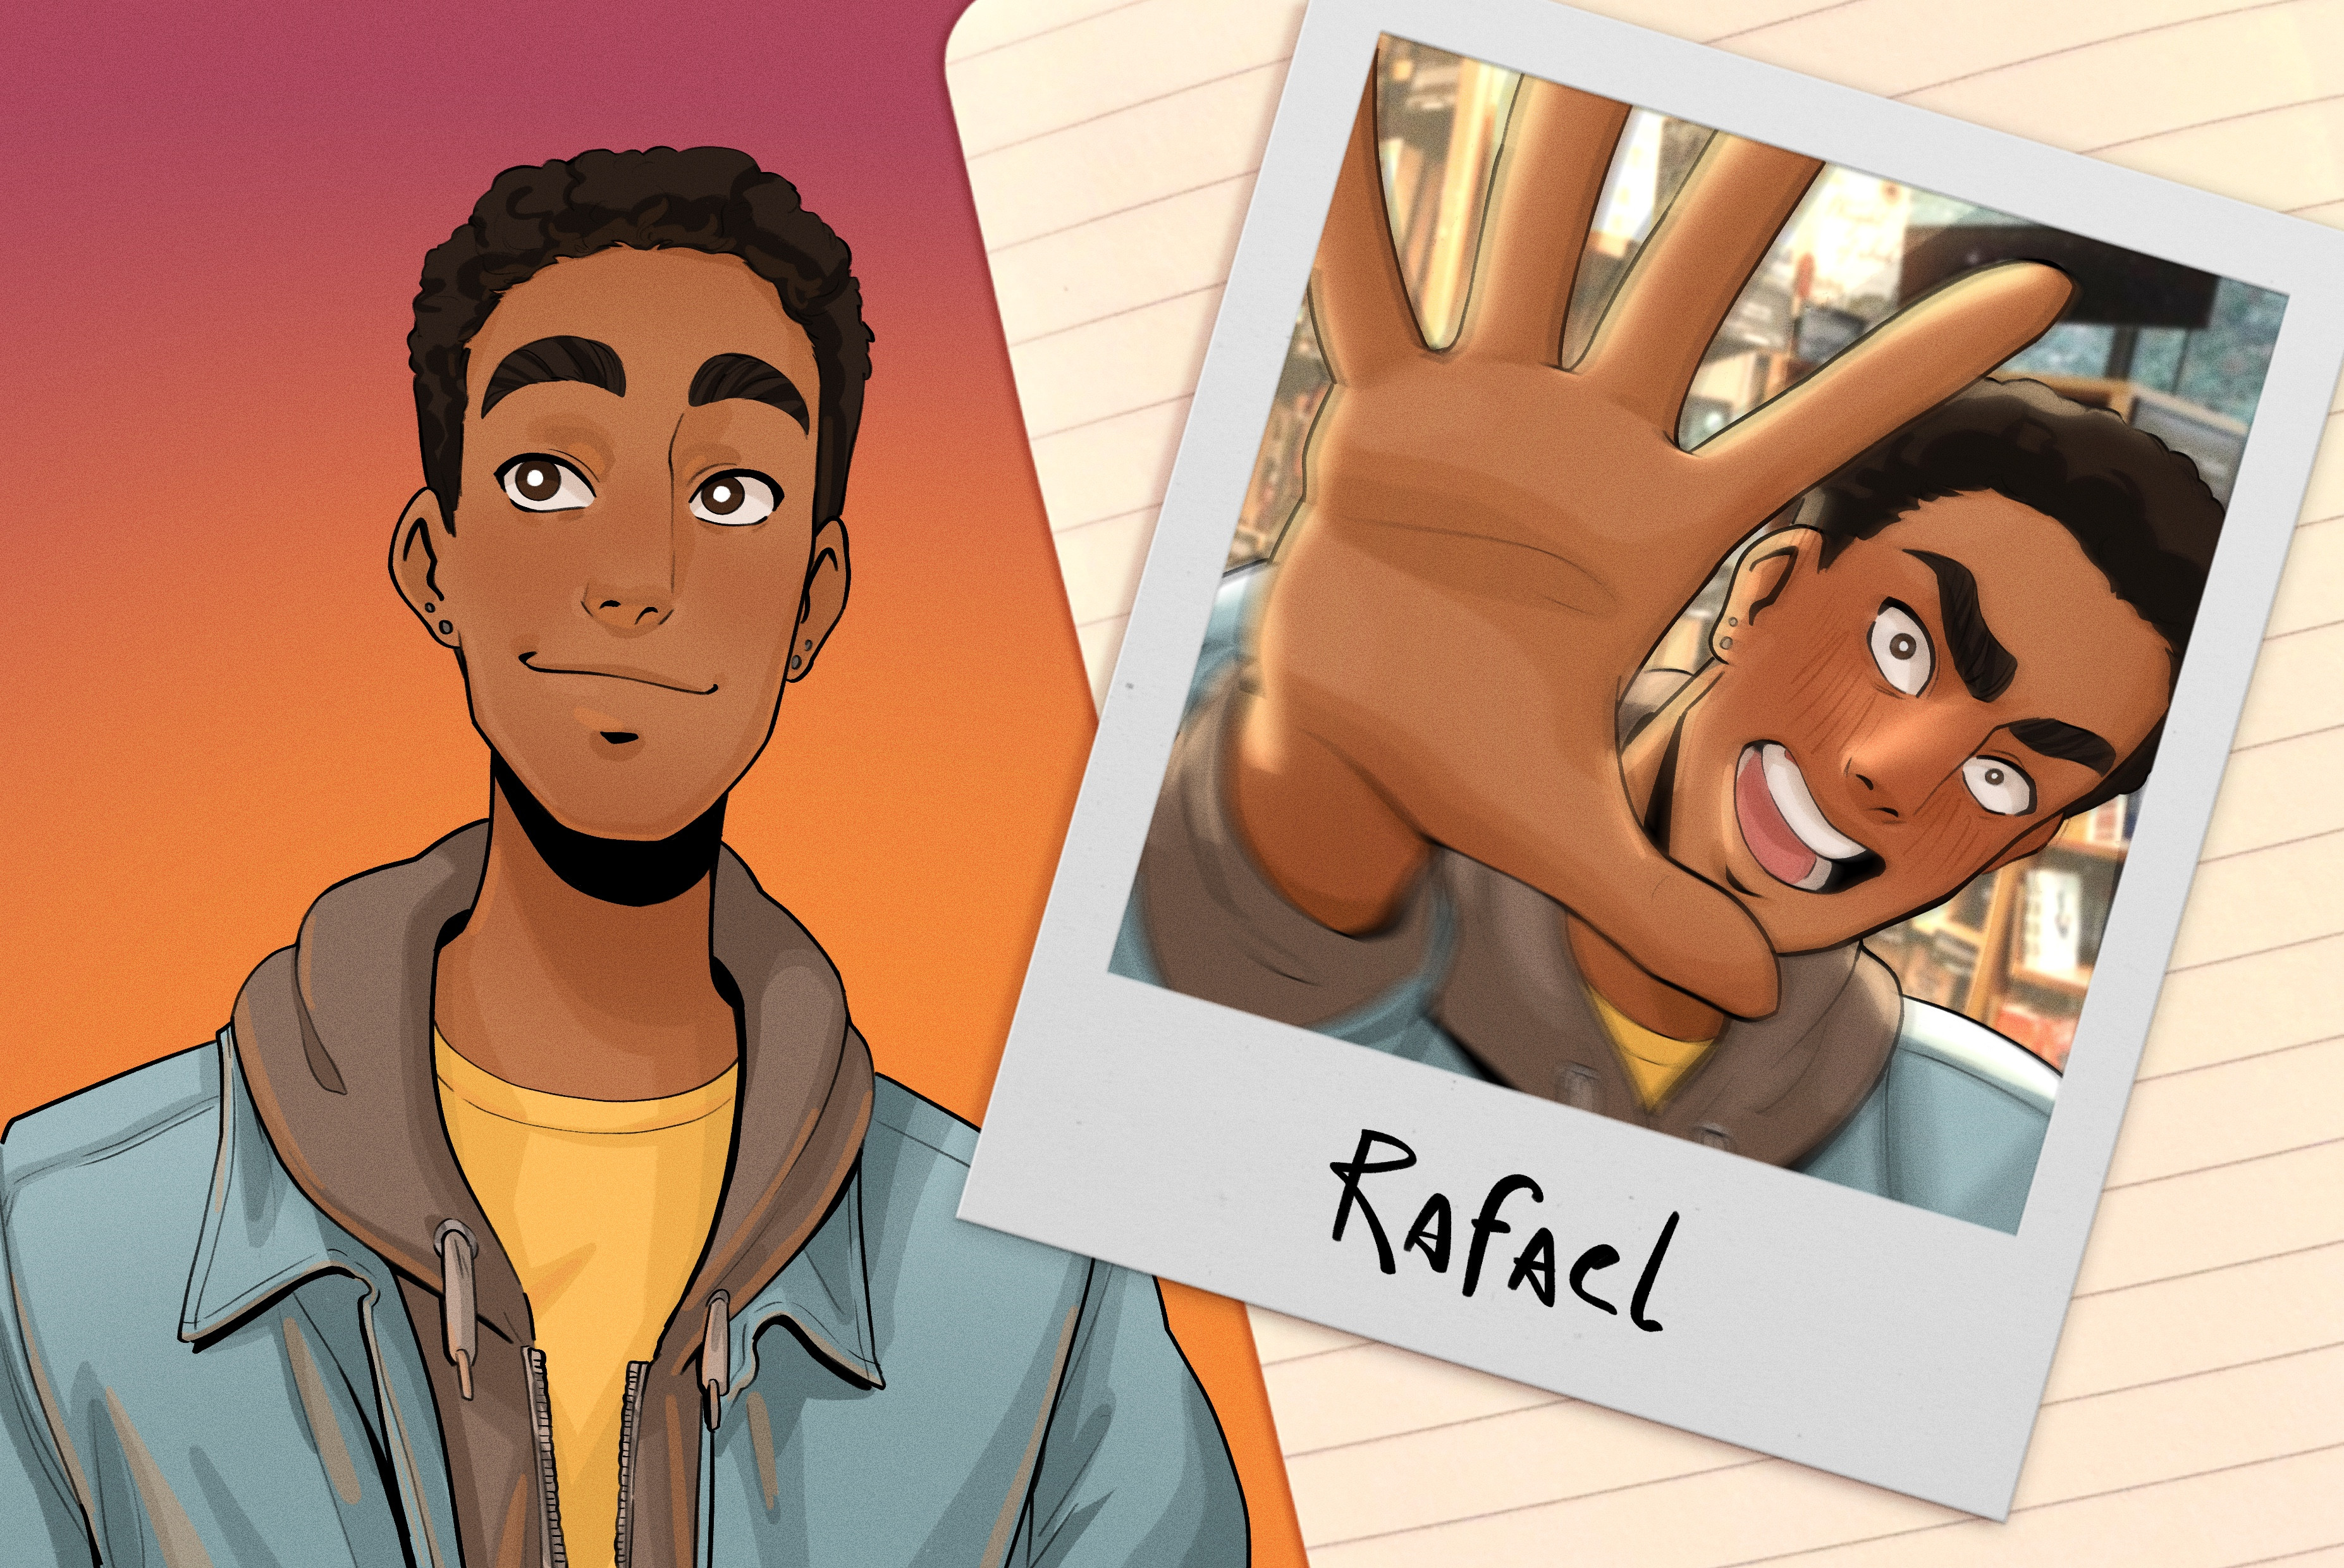 Having been born a werewolf under his family’s curse, Rafael wasn’t dealt an easy hand in life, but finding a purpose as the co-owner of Afterlight does make life during the dark a little easier.